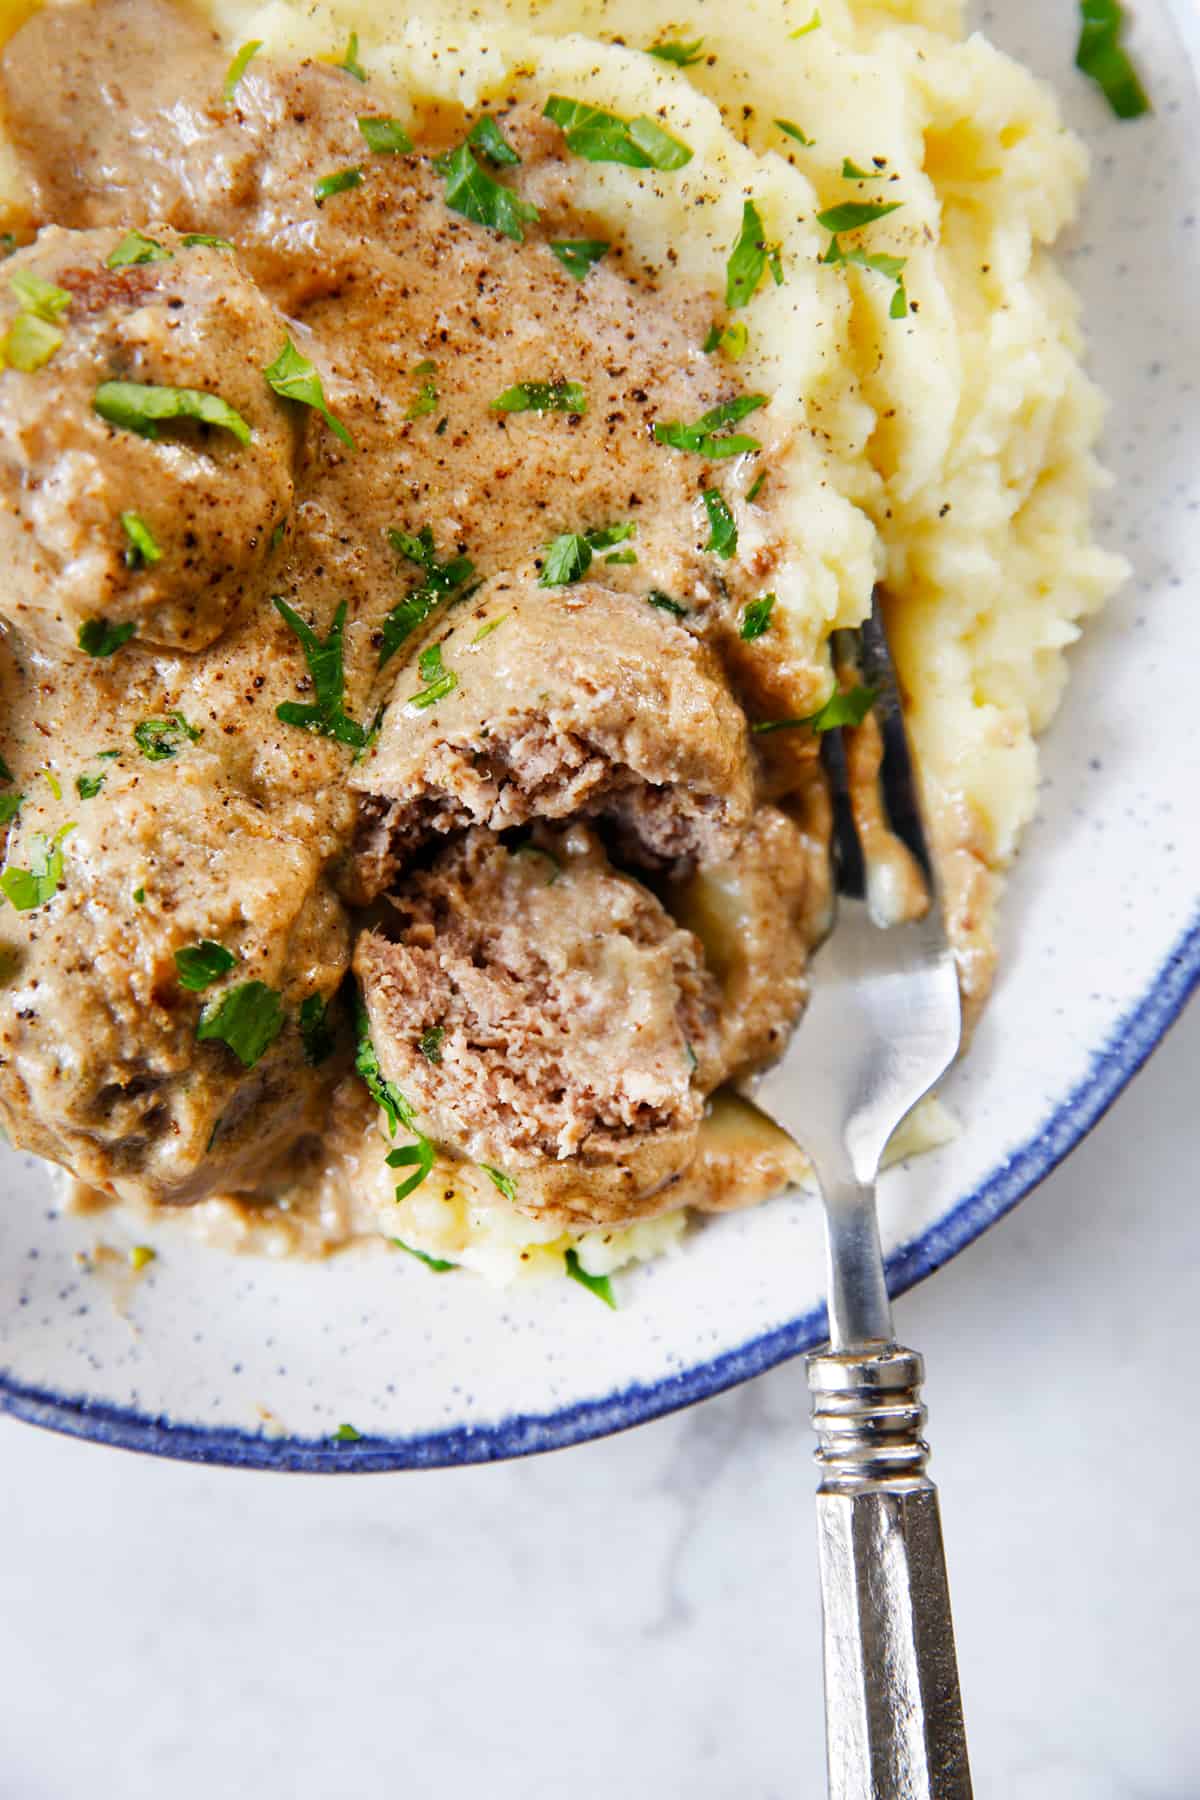 Gluten free Swedish Meatballs on a bed of mashed potatoes.